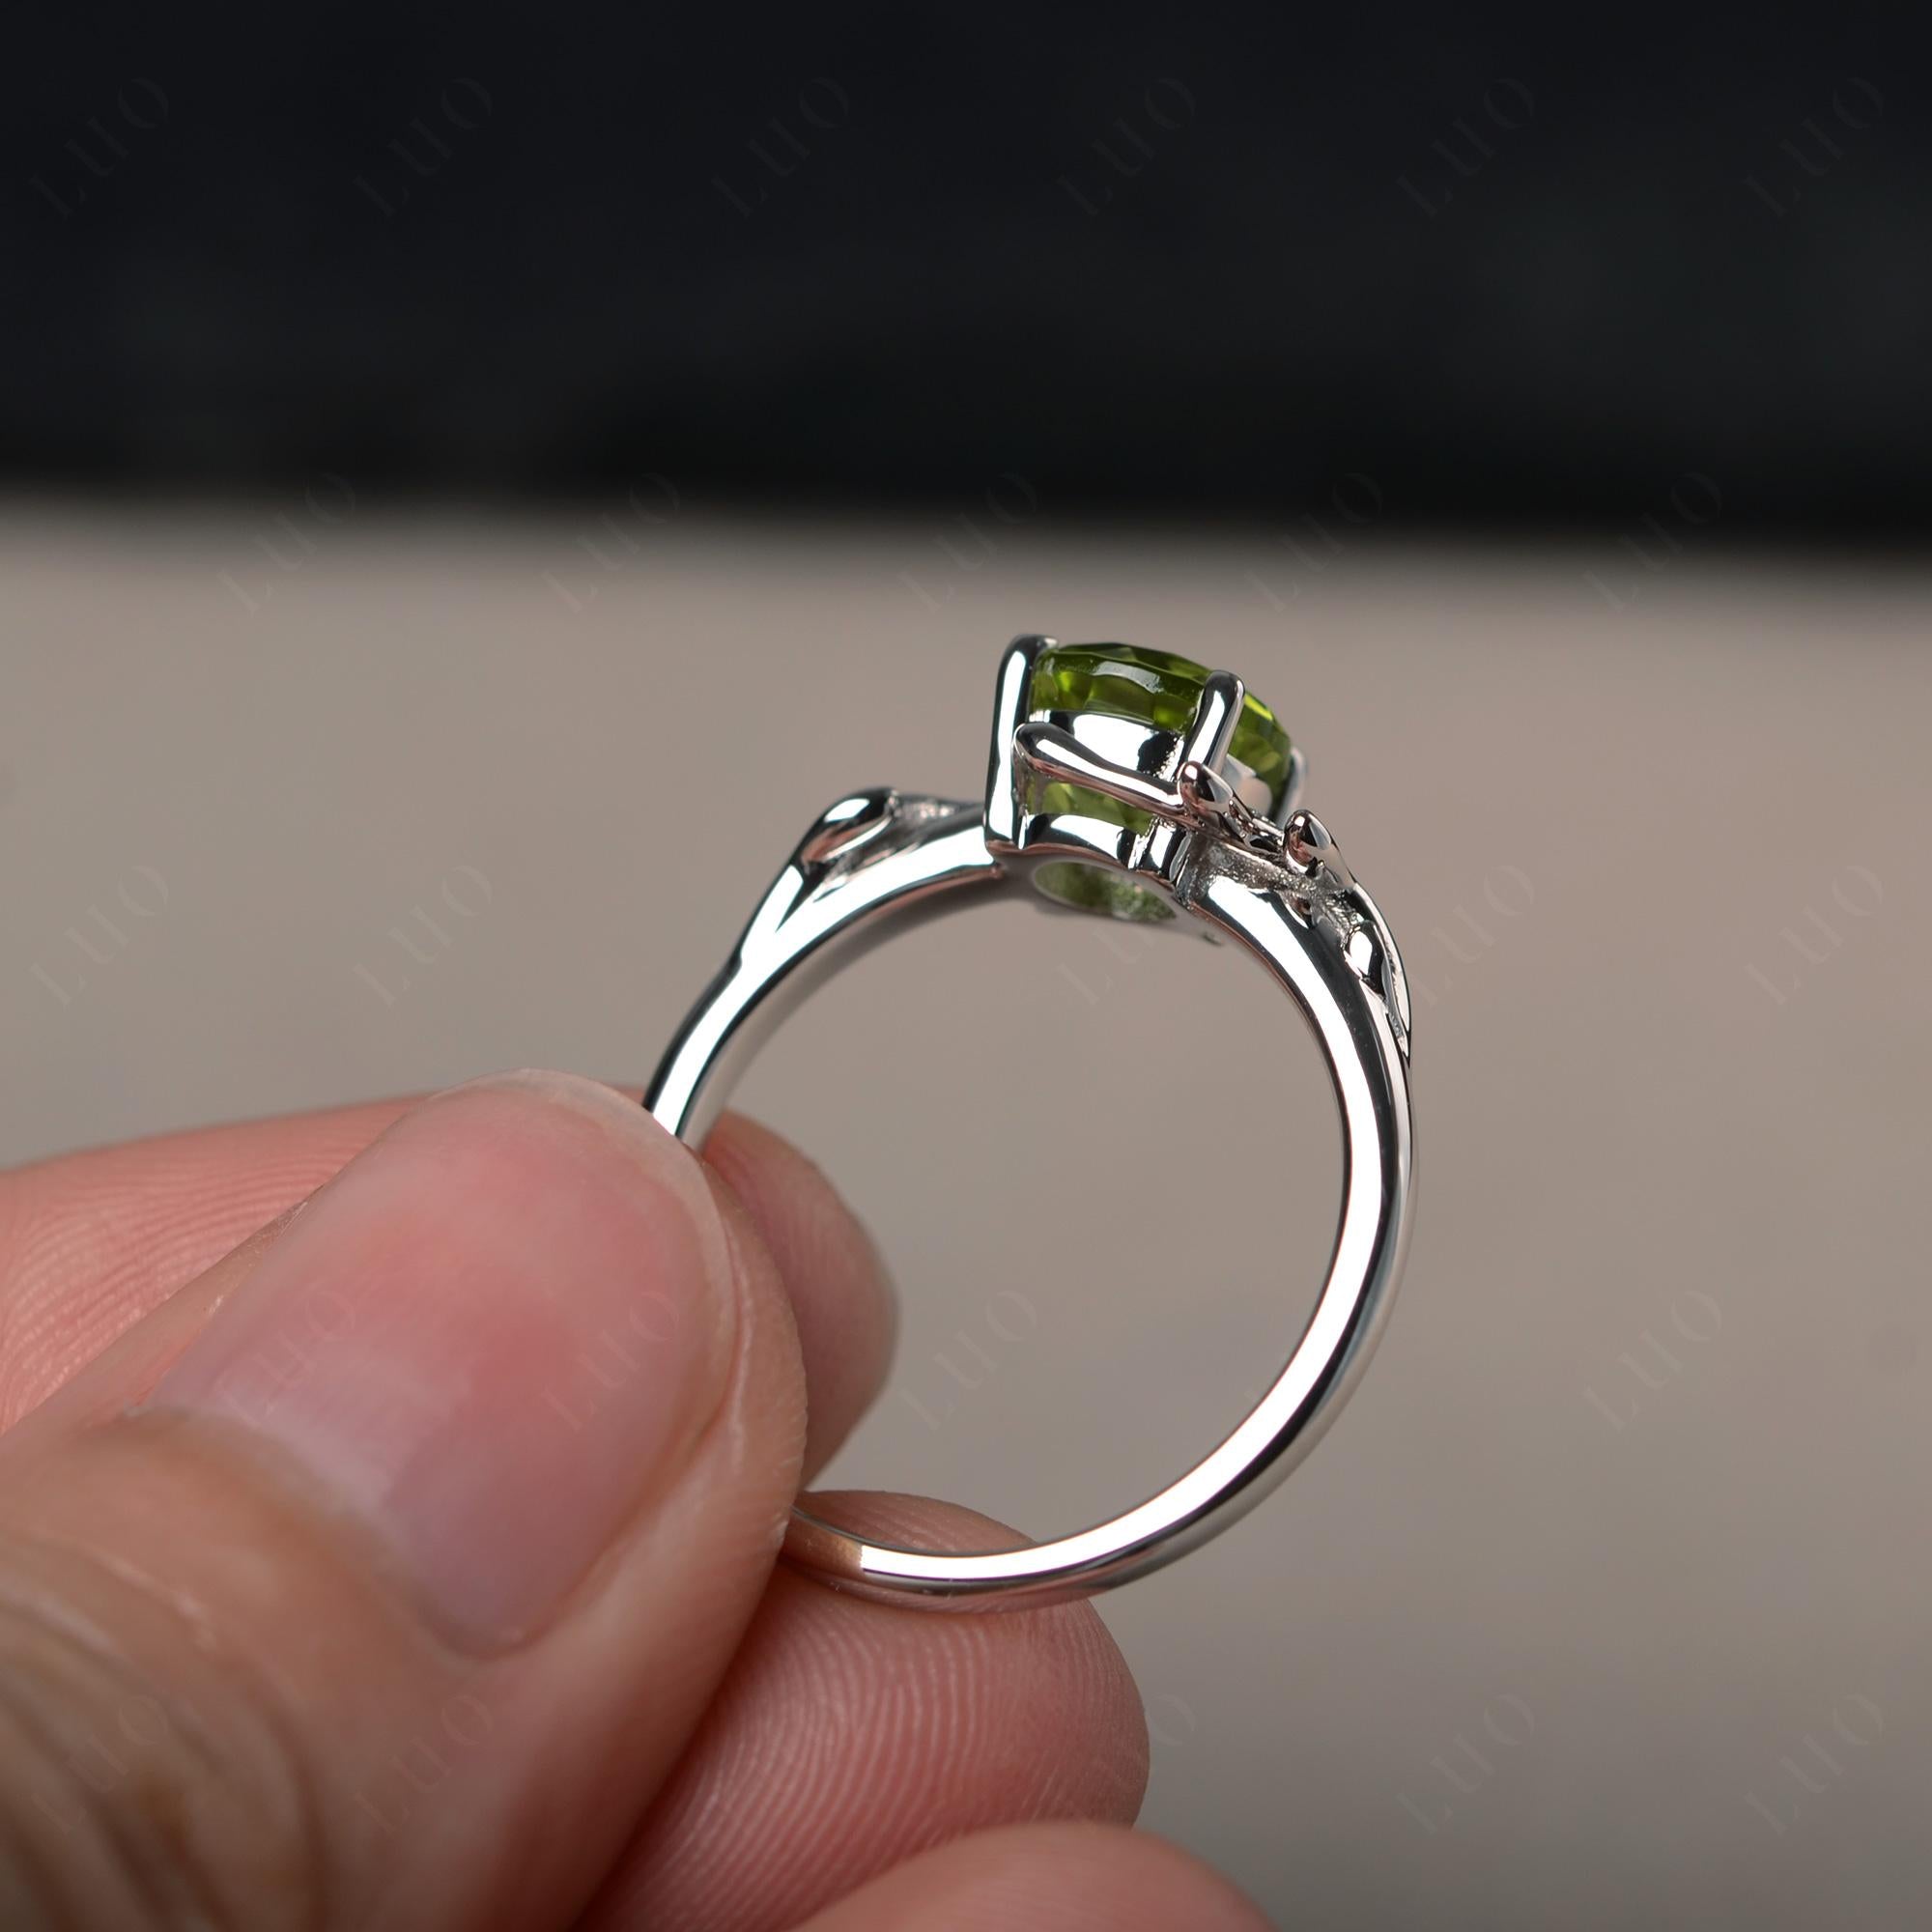 Vine Peridot Solitaire Engagement Ring - LUO Jewelry